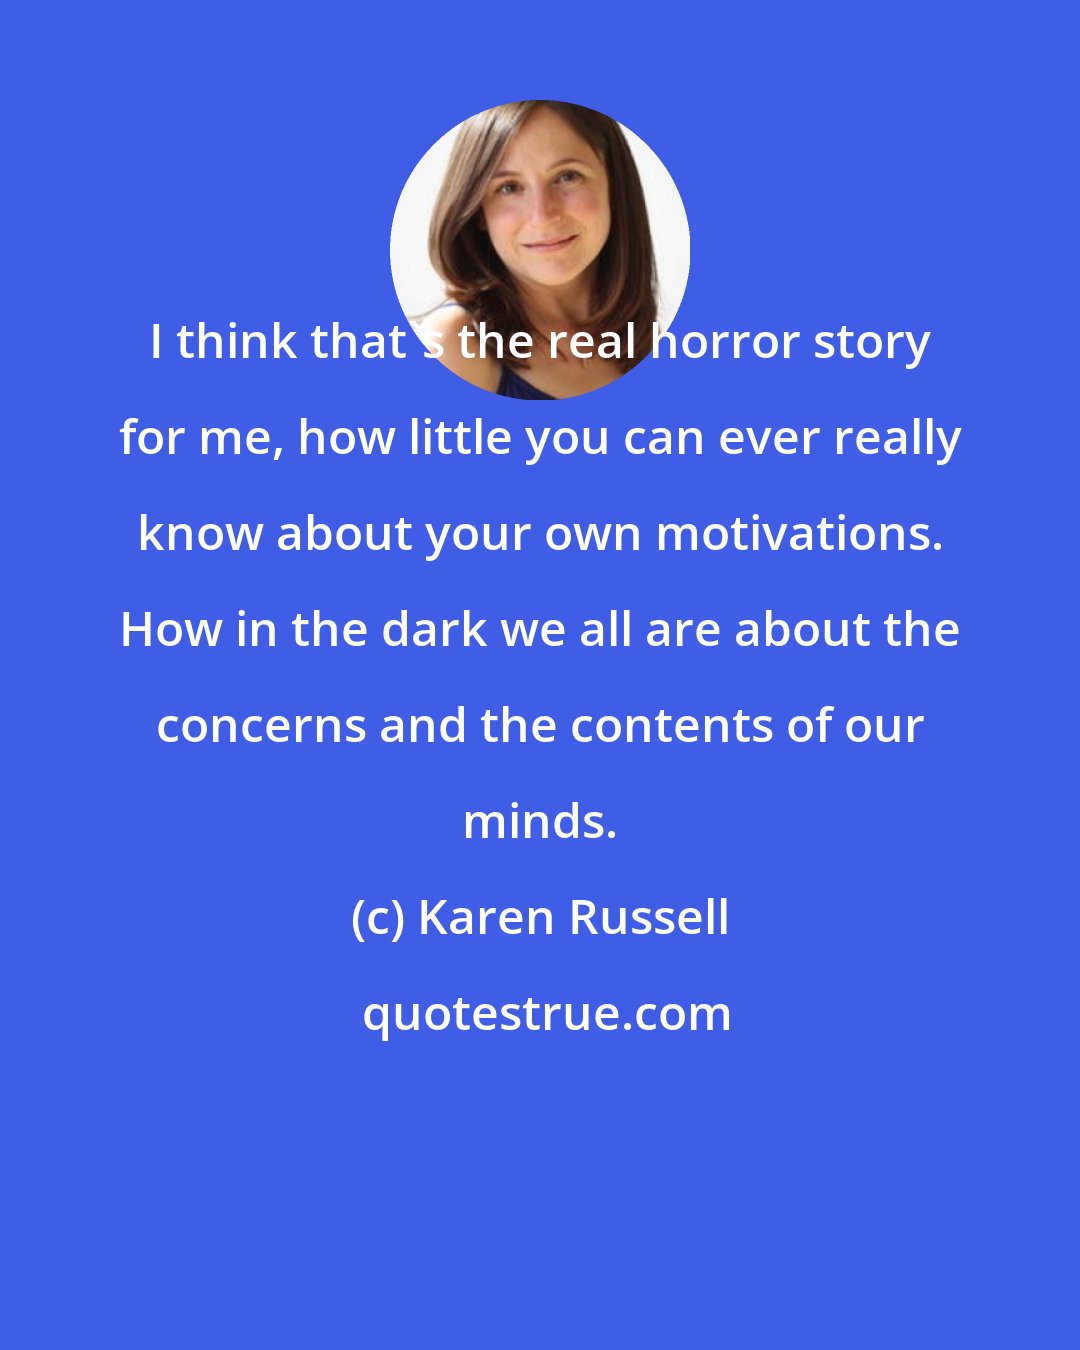 Karen Russell: I think that's the real horror story for me, how little you can ever really know about your own motivations. How in the dark we all are about the concerns and the contents of our minds.